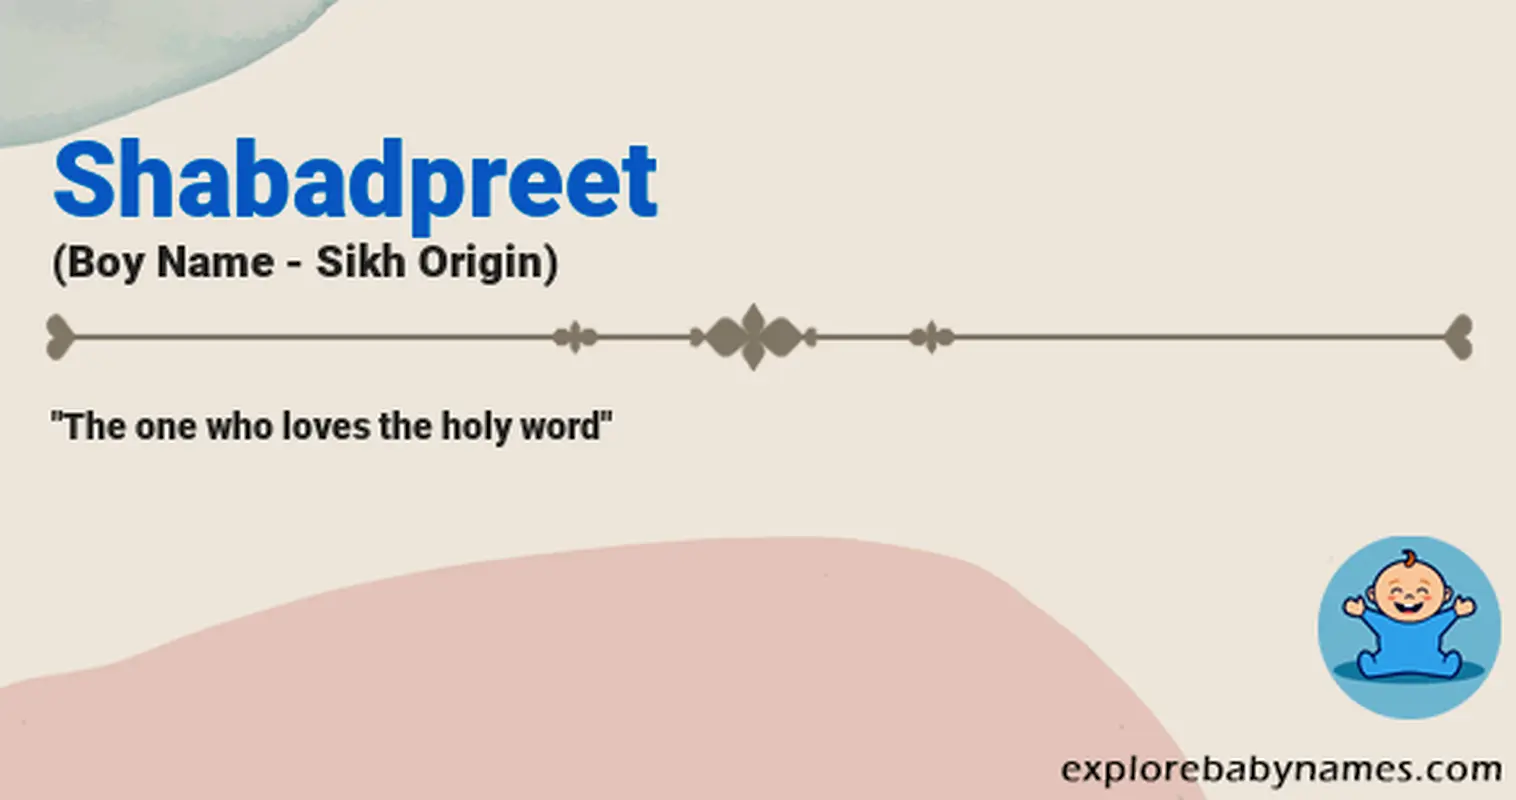 Meaning of Shabadpreet